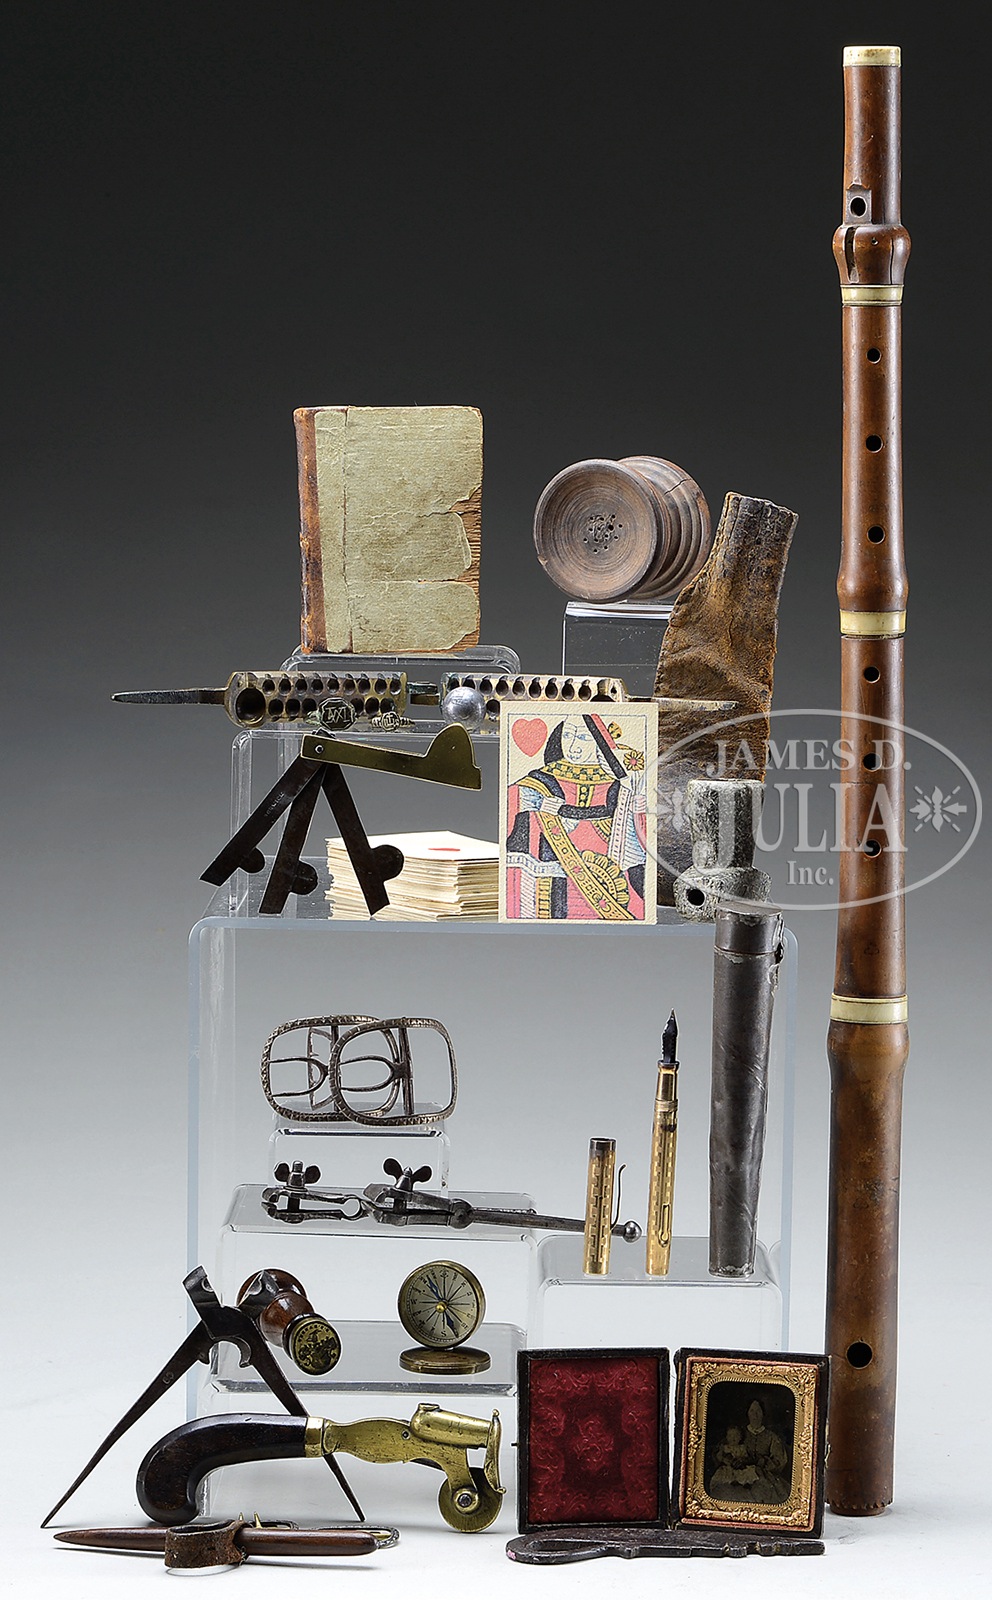 GROUP OF TWENTY SEVEN INTERESTING COLLECTIBLE ITEMS. 1) 6" pistol grip and brass powder tester,